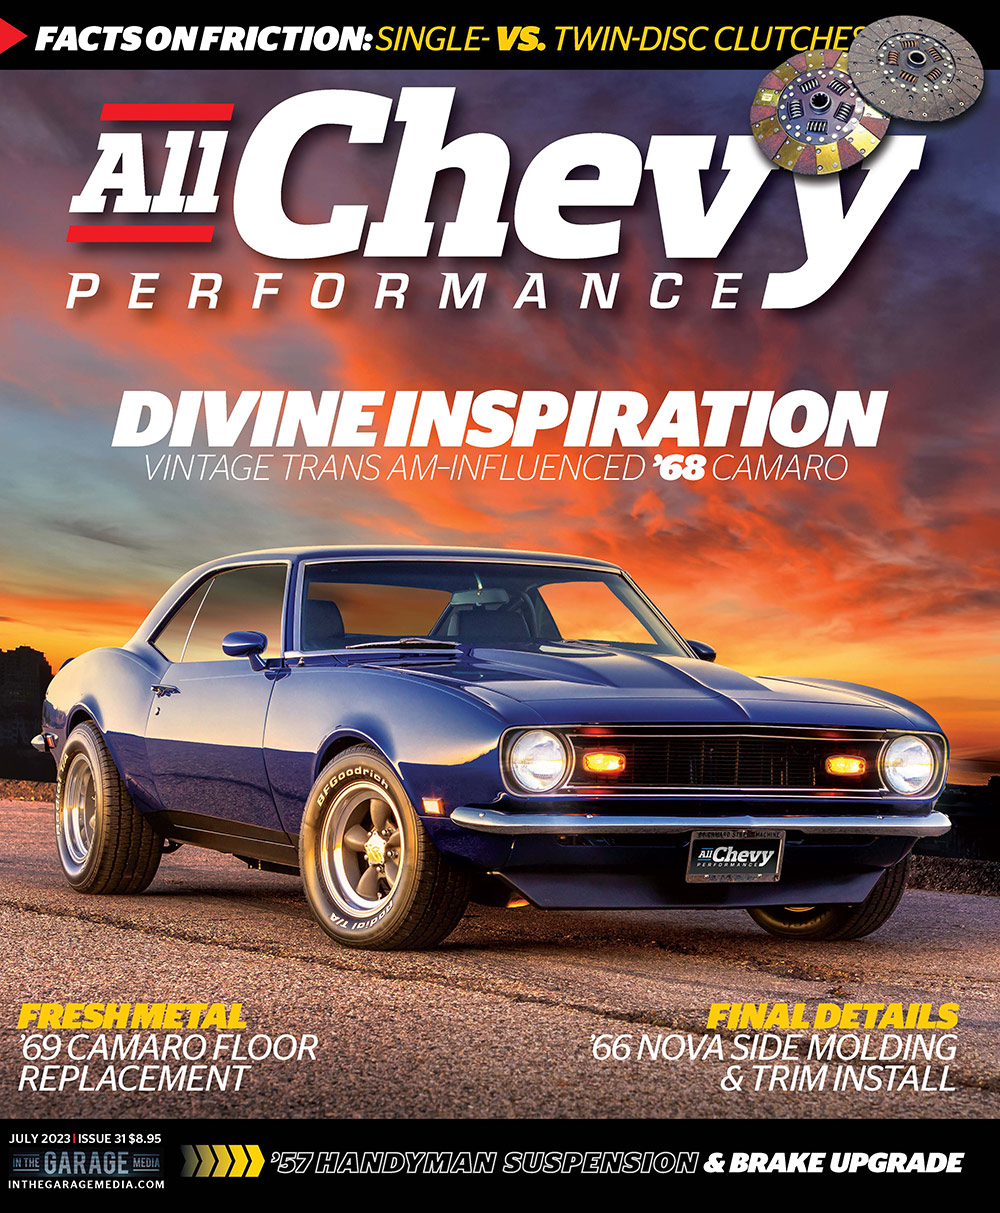 All Chevy Performance July 2023 cover